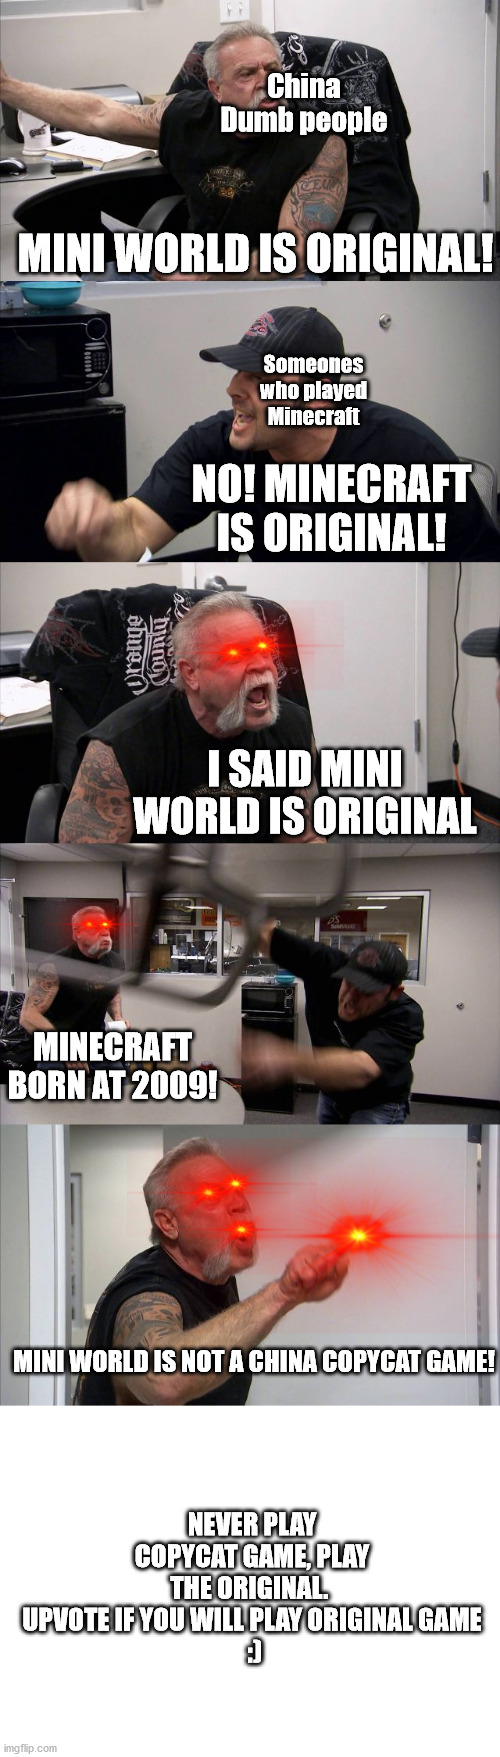 NO COPYCAT ALLOWED |  China Dumb people; MINI WORLD IS ORIGINAL! Someones who played Minecraft; NO! MINECRAFT IS ORIGINAL! I SAID MINI WORLD IS ORIGINAL; MINECRAFT BORN AT 2009! MINI WORLD IS NOT A CHINA COPYCAT GAME! NEVER PLAY COPYCAT GAME, PLAY THE ORIGINAL.  UPVOTE IF YOU WILL PLAY ORIGINAL GAME
 :) | image tagged in memes,american chopper argument | made w/ Imgflip meme maker